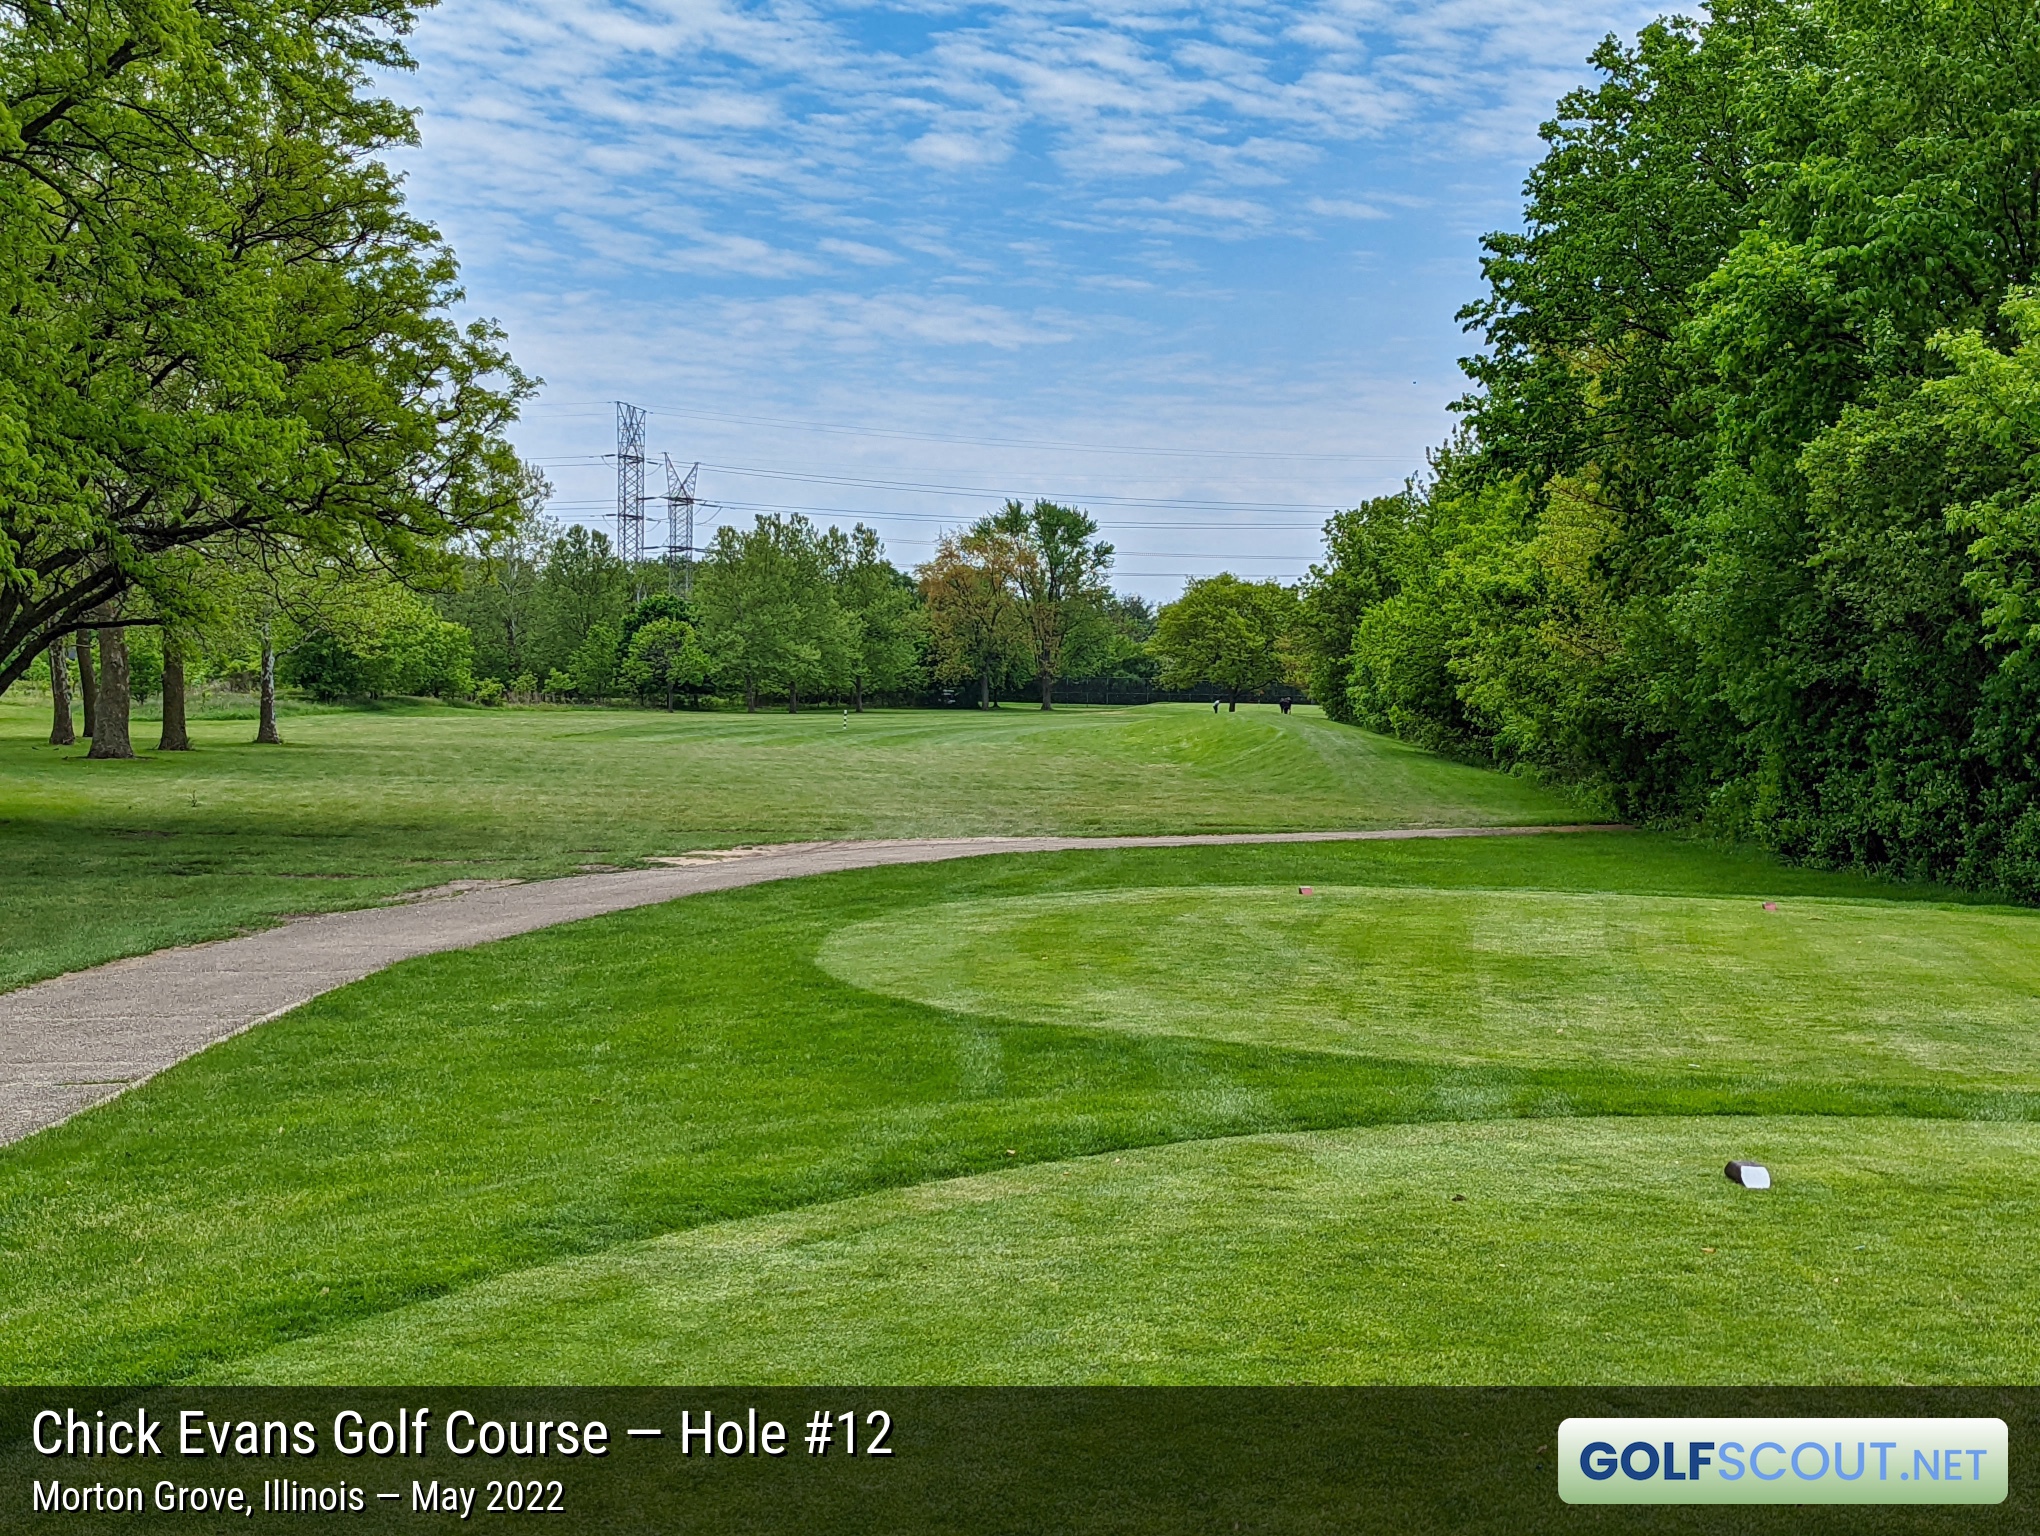 Photo of hole #12 at Chick Evans Golf Course in Morton Grove, Illinois. 